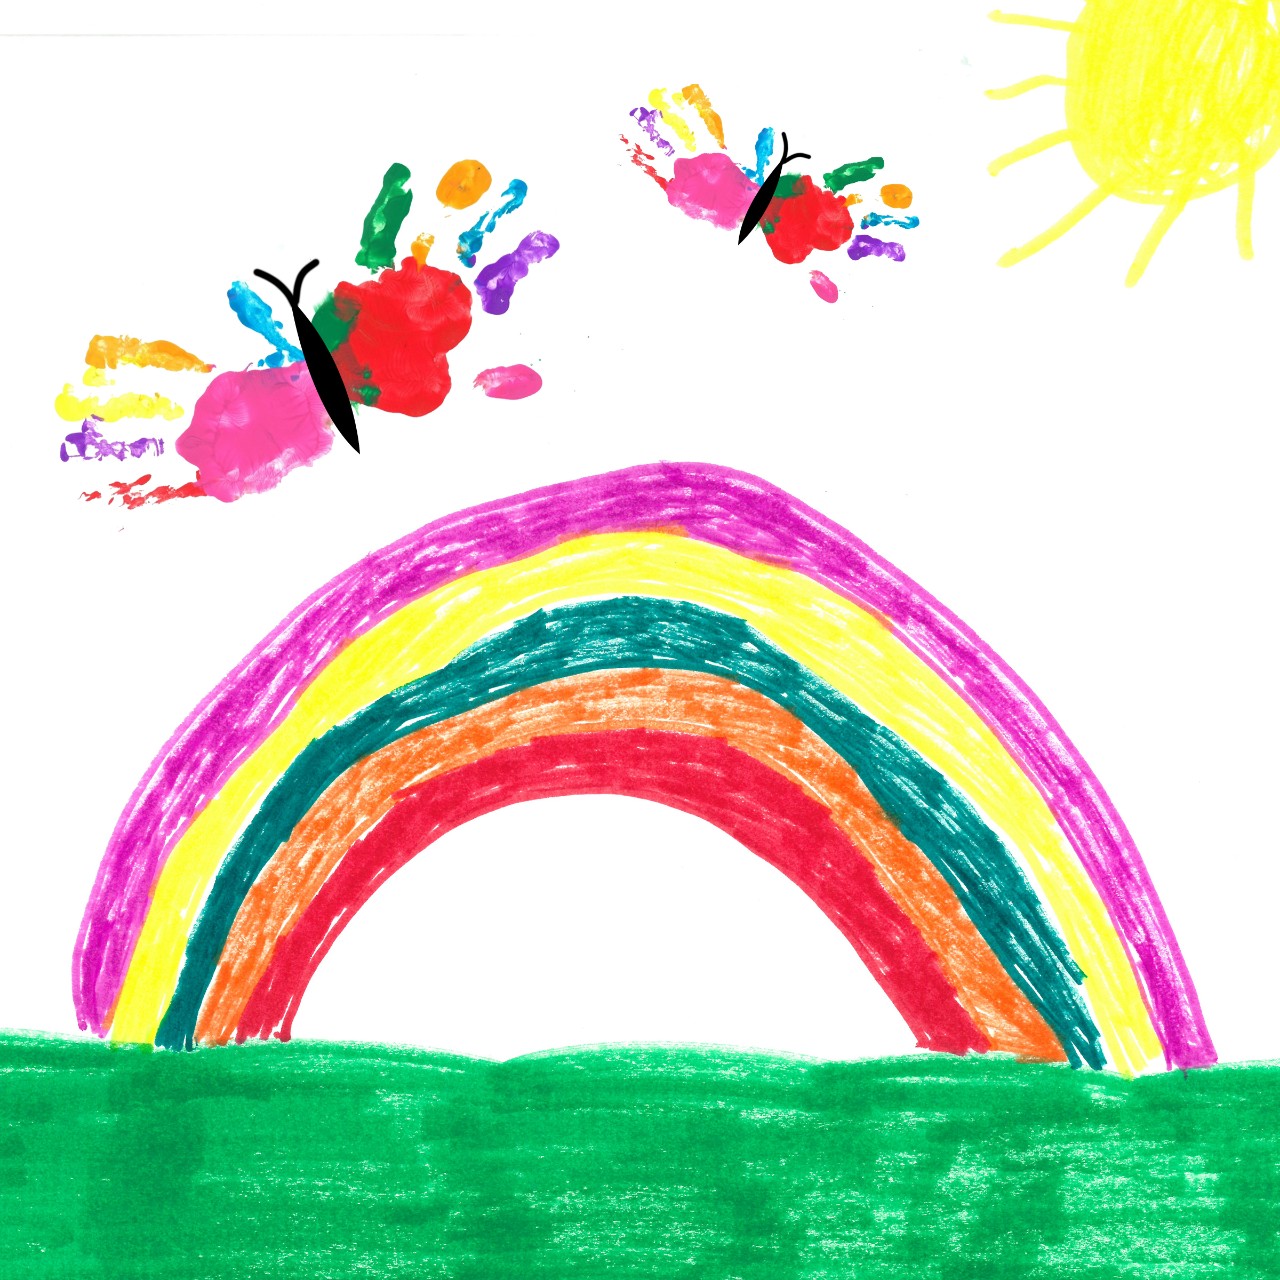 Artwork inspired by St. Jude patients Marleigh and Camden